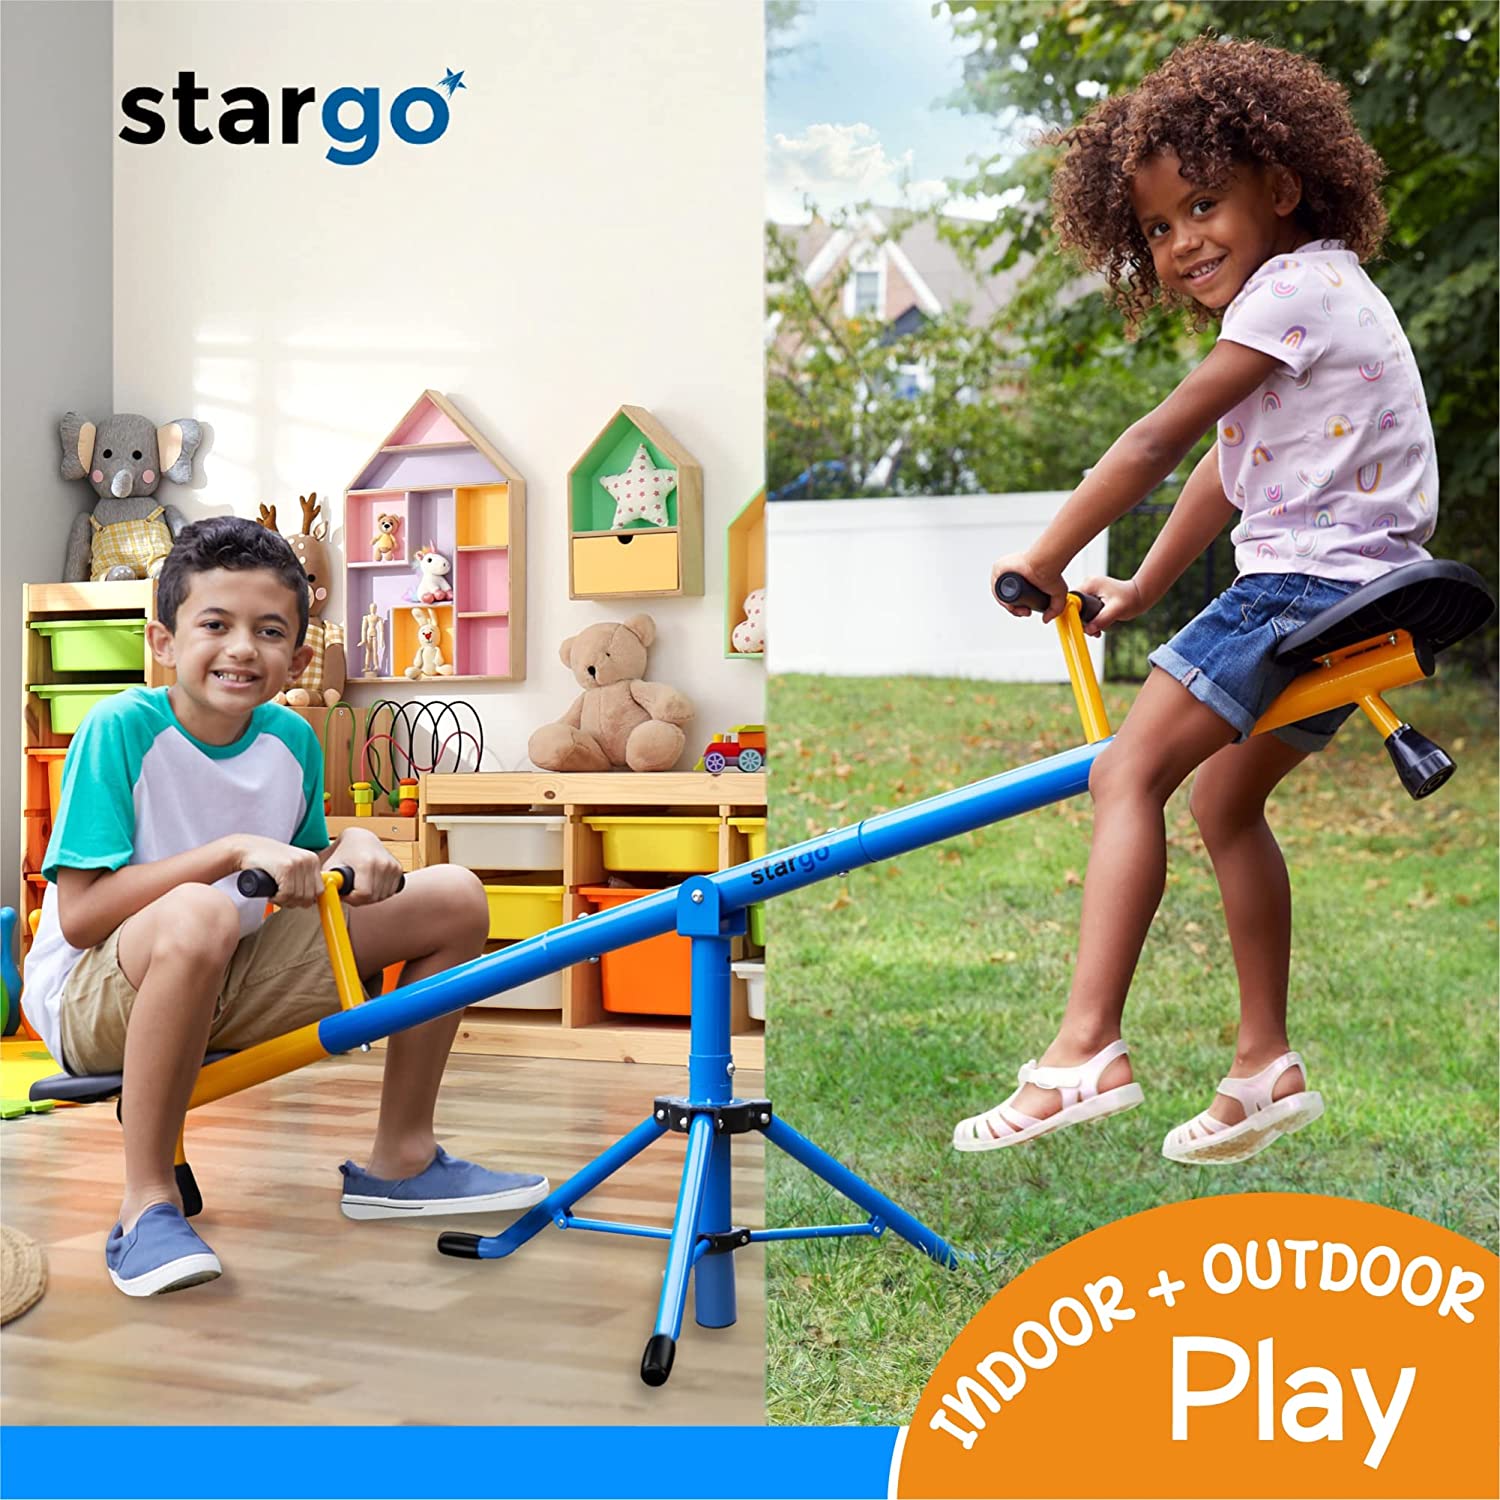 Stargo 360 Swivel Spinning Seesaw for Kids, Teeter Totter with Adjustable Frame Height 46-70”, Indoor or Outdoor Playground Equipment for Toddlers - image 5 of 9